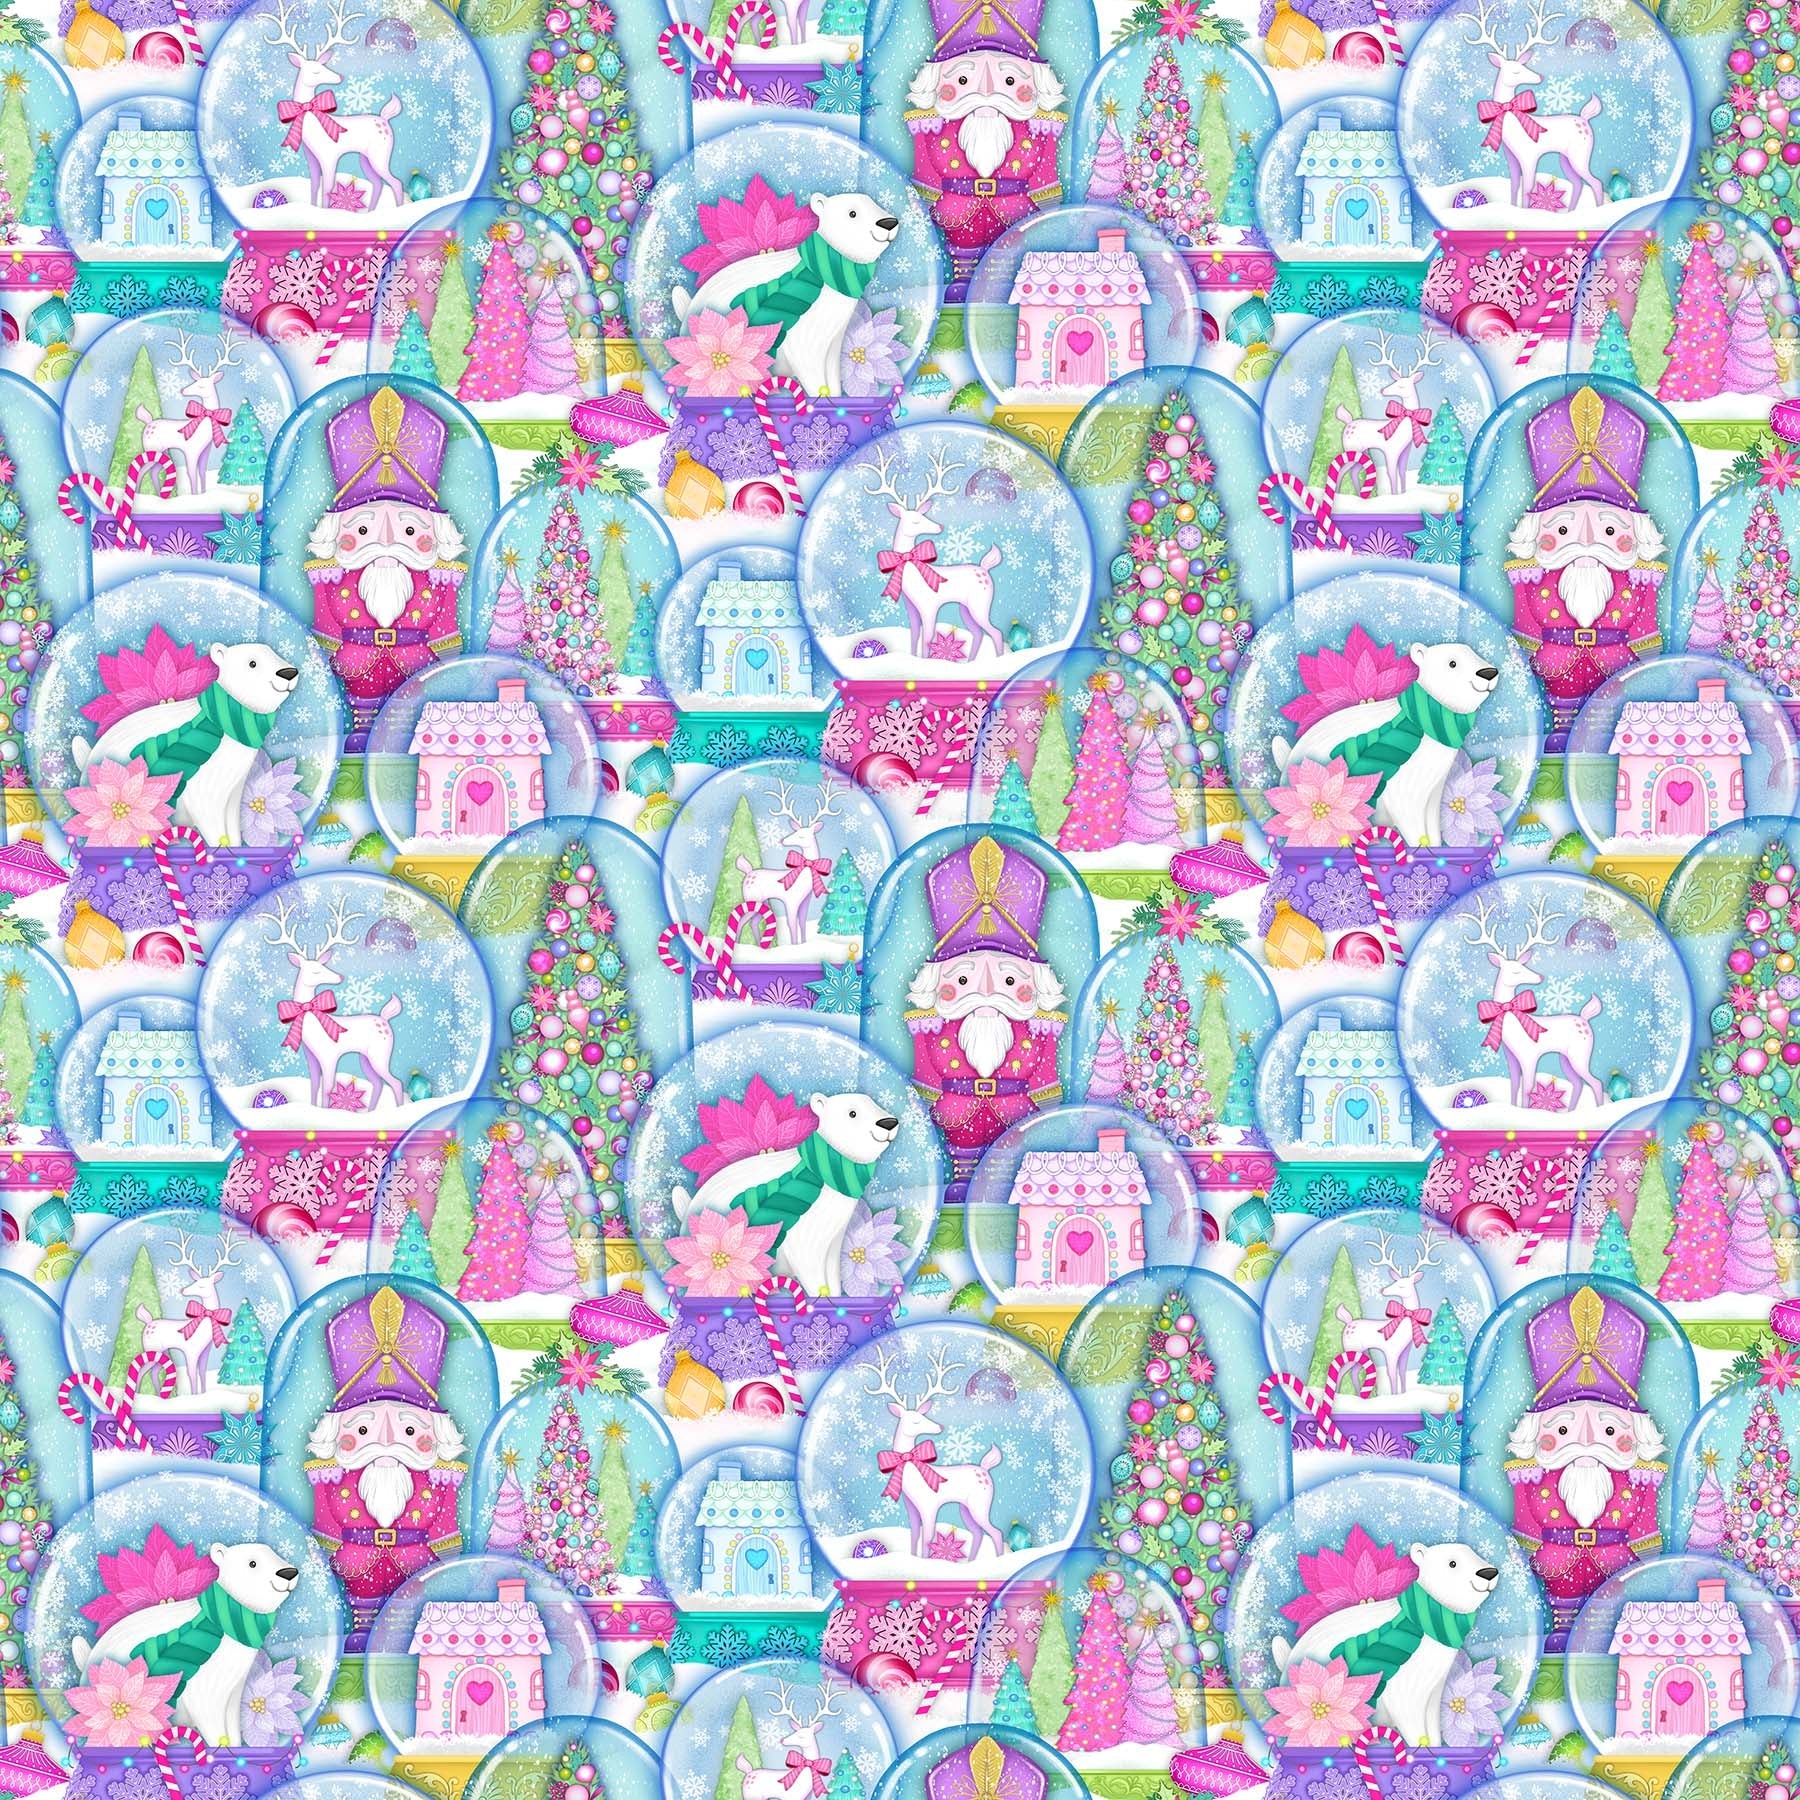 Merry and Bright Turquoise Multi Packed Globes Digital Print Fabric